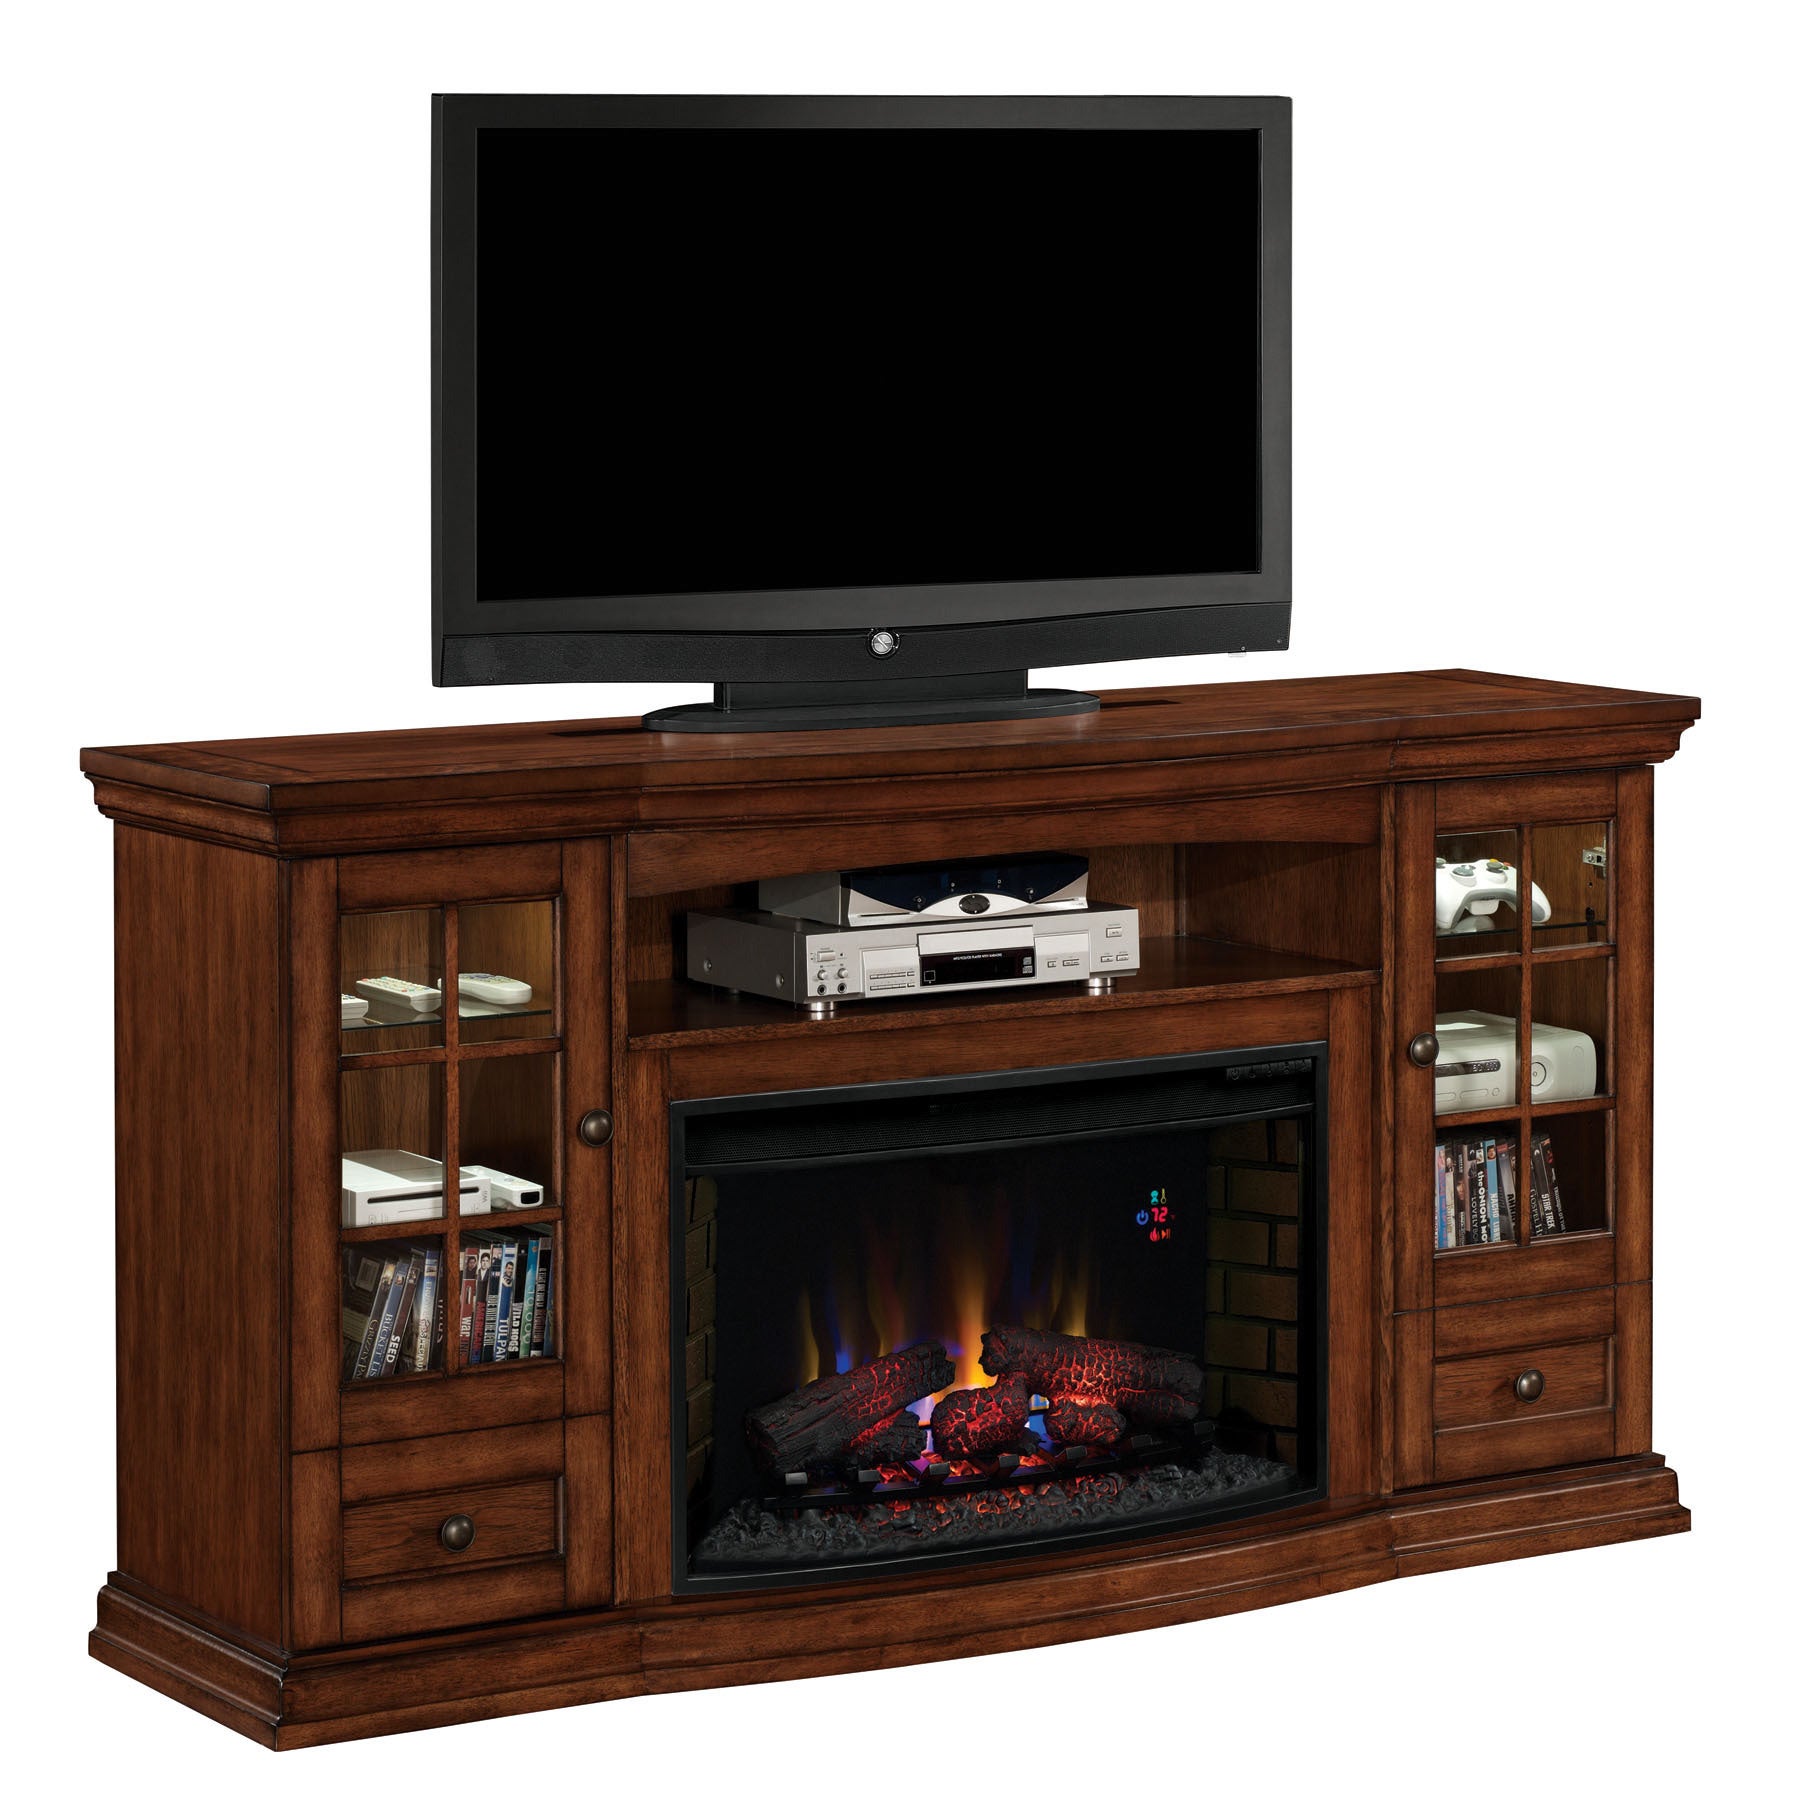 Seagate TV Stand with 32 inch Curved Infrared Quartz Fireplace Pecan 0fd486b1 e919 4f97 83f3 df1a2a95b4af